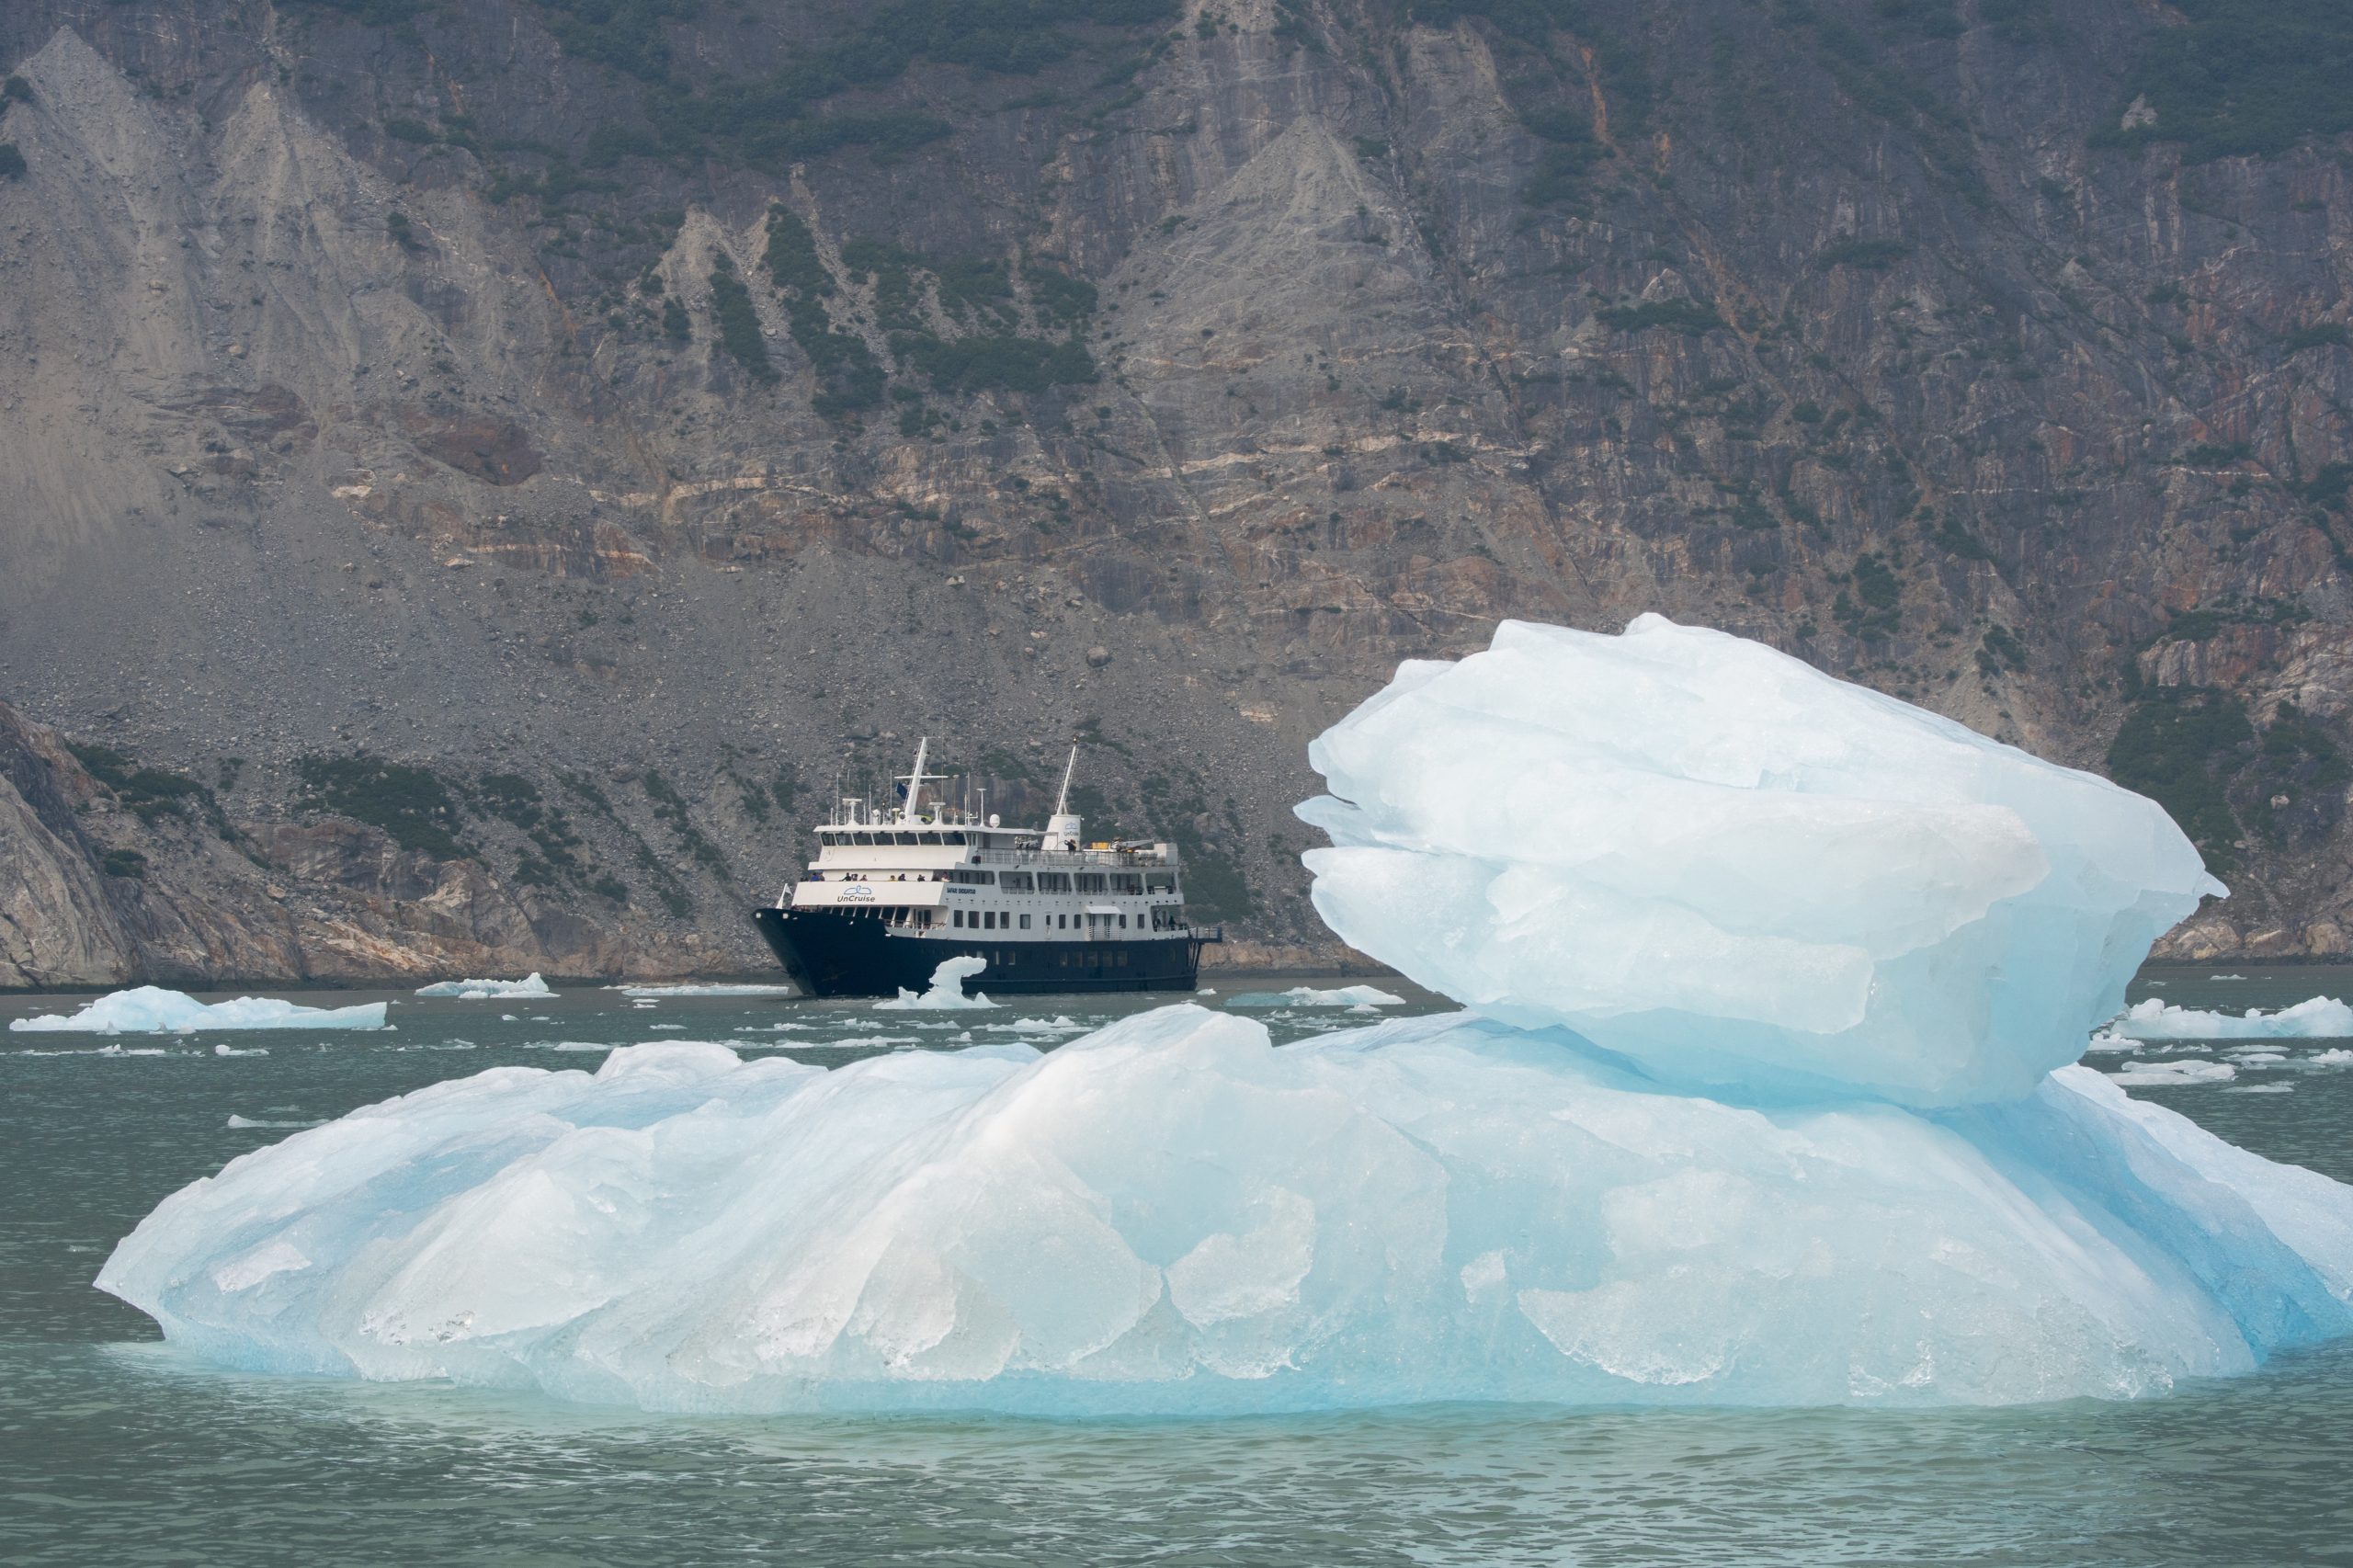 Alaska increases cruise tourism limits as residents argue peace of mind versus economy